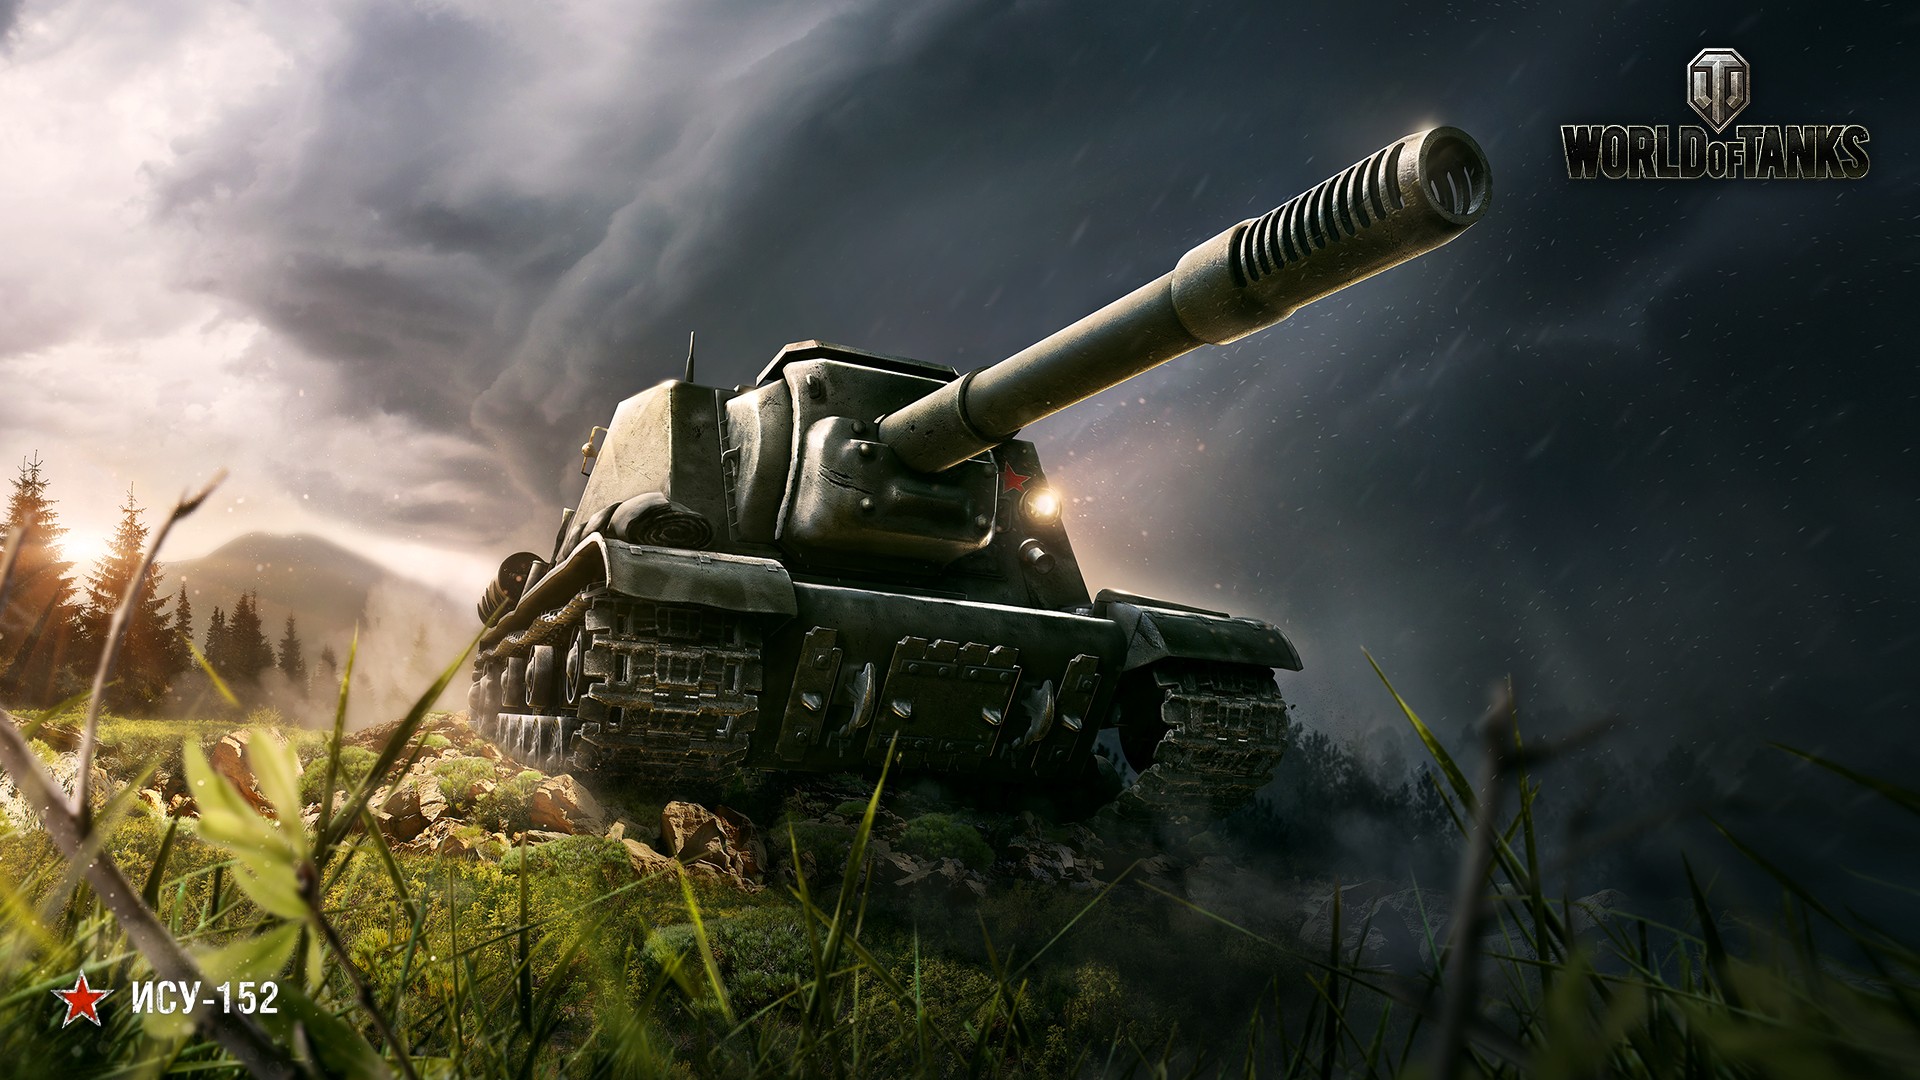 Wallpapers vehicle weapon tank on the desktop